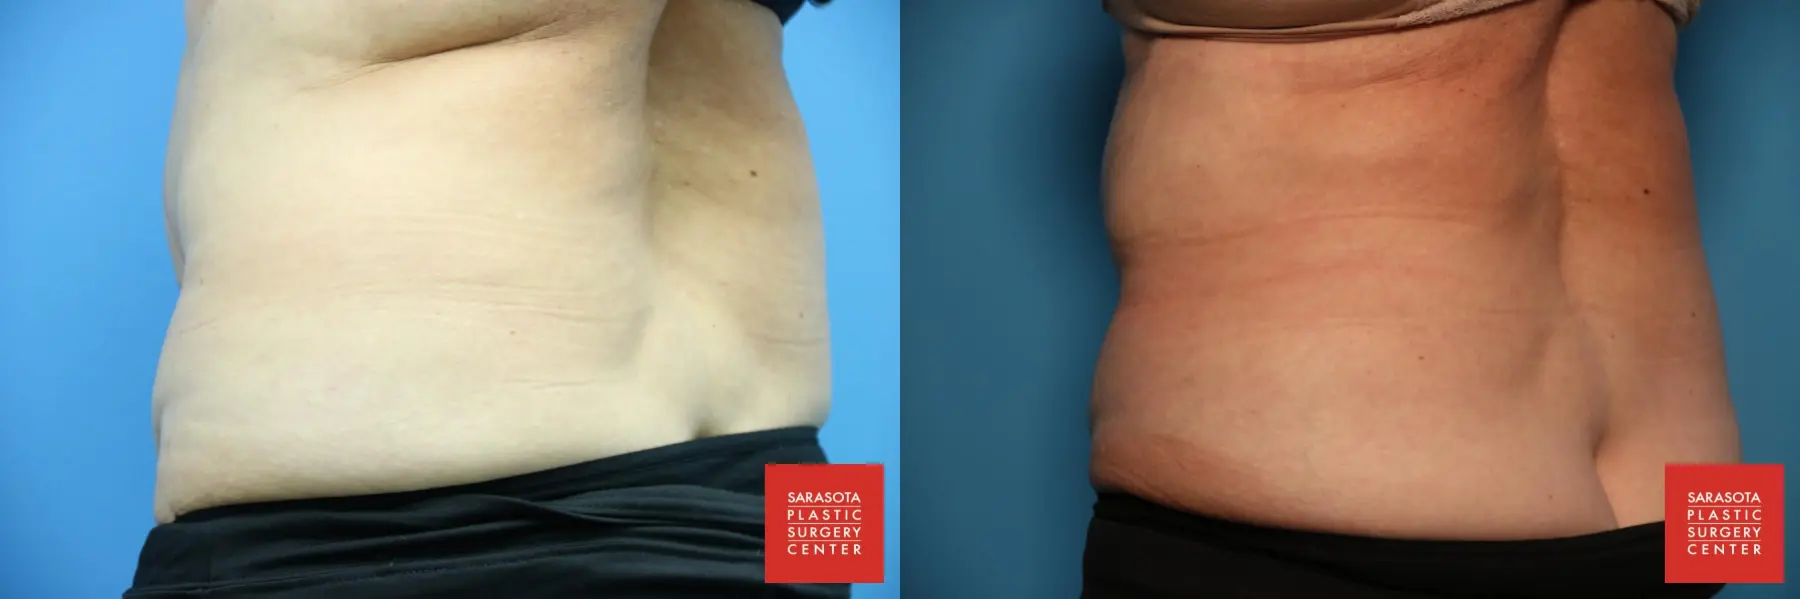 CoolSculpting®: Patient 6 - Before and After 4